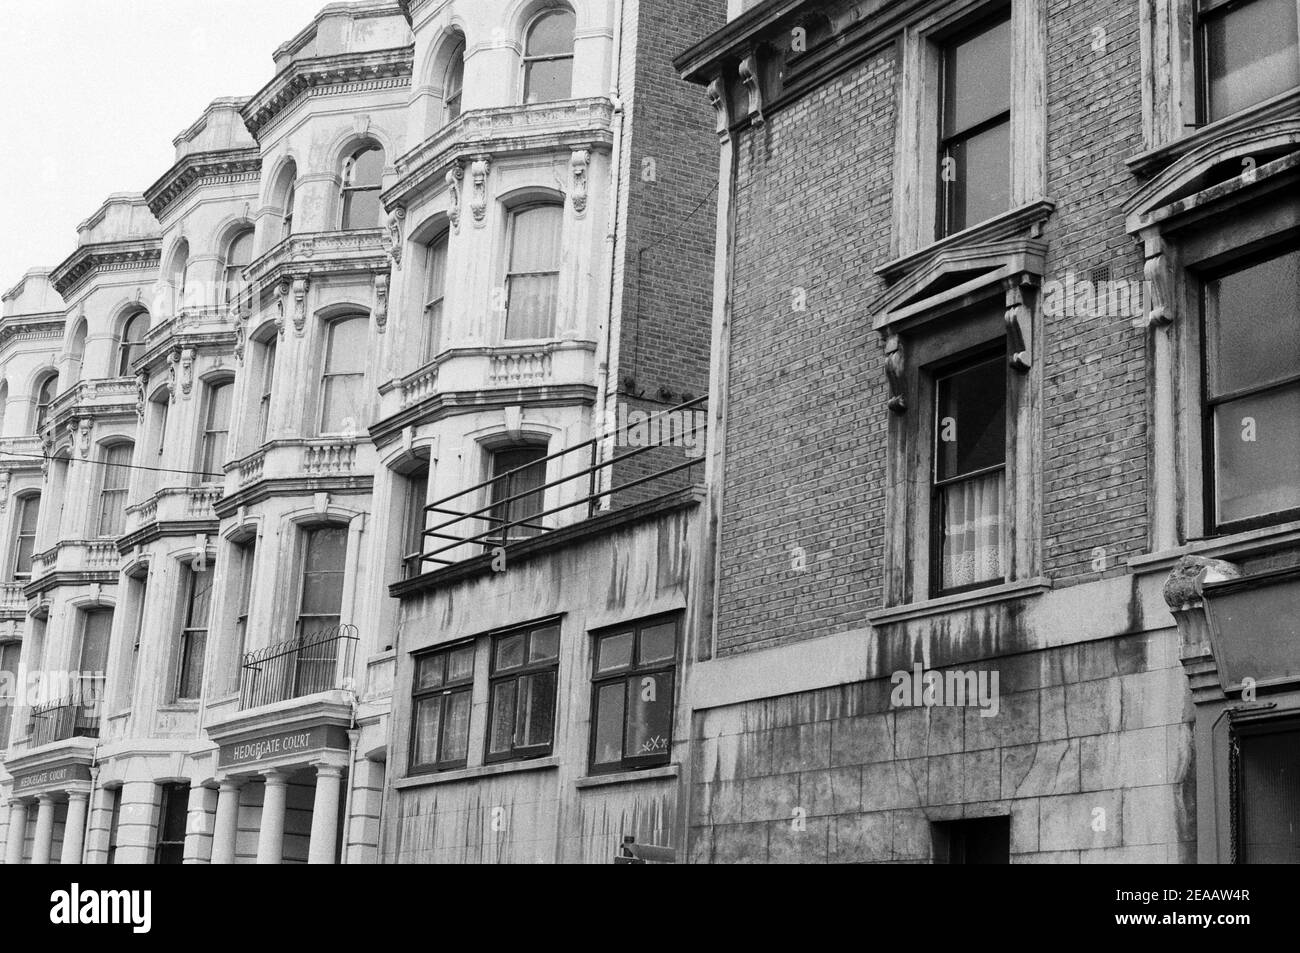 UK, West London, Notting Hill, 1973. Rundown & dilapidated large four-story houses are starting to be restored and redecorated. No. 1-3 Powis Terrace, Hedgegate Court, near Talbot Road junction. Stock Photo